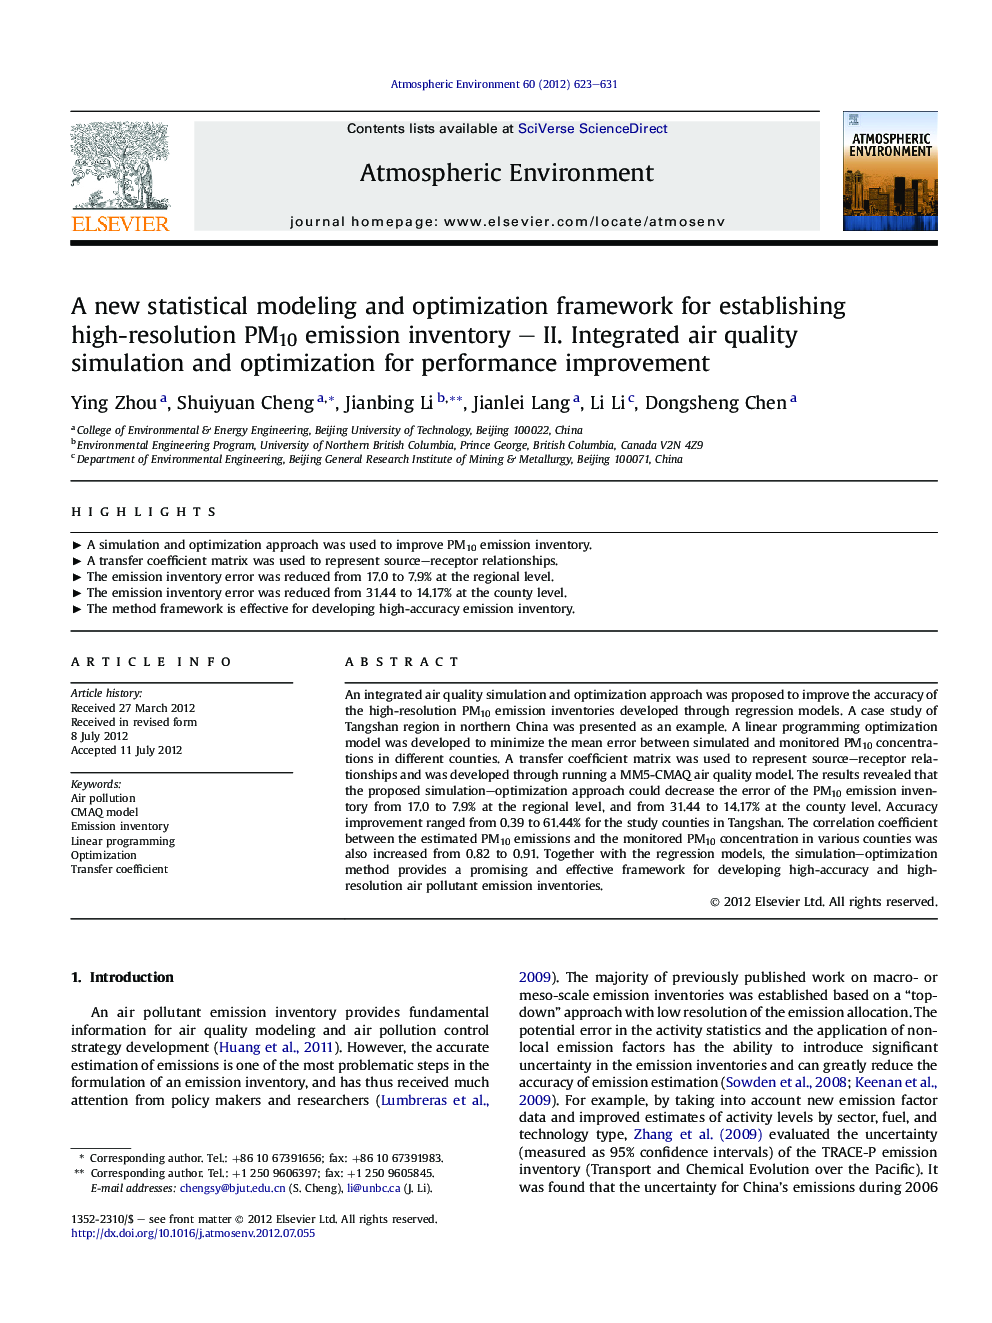 A new statistical modeling and optimization framework for establishing high-resolution PM10 emission inventory - II. Integrated air quality simulation and optimization for performance improvement